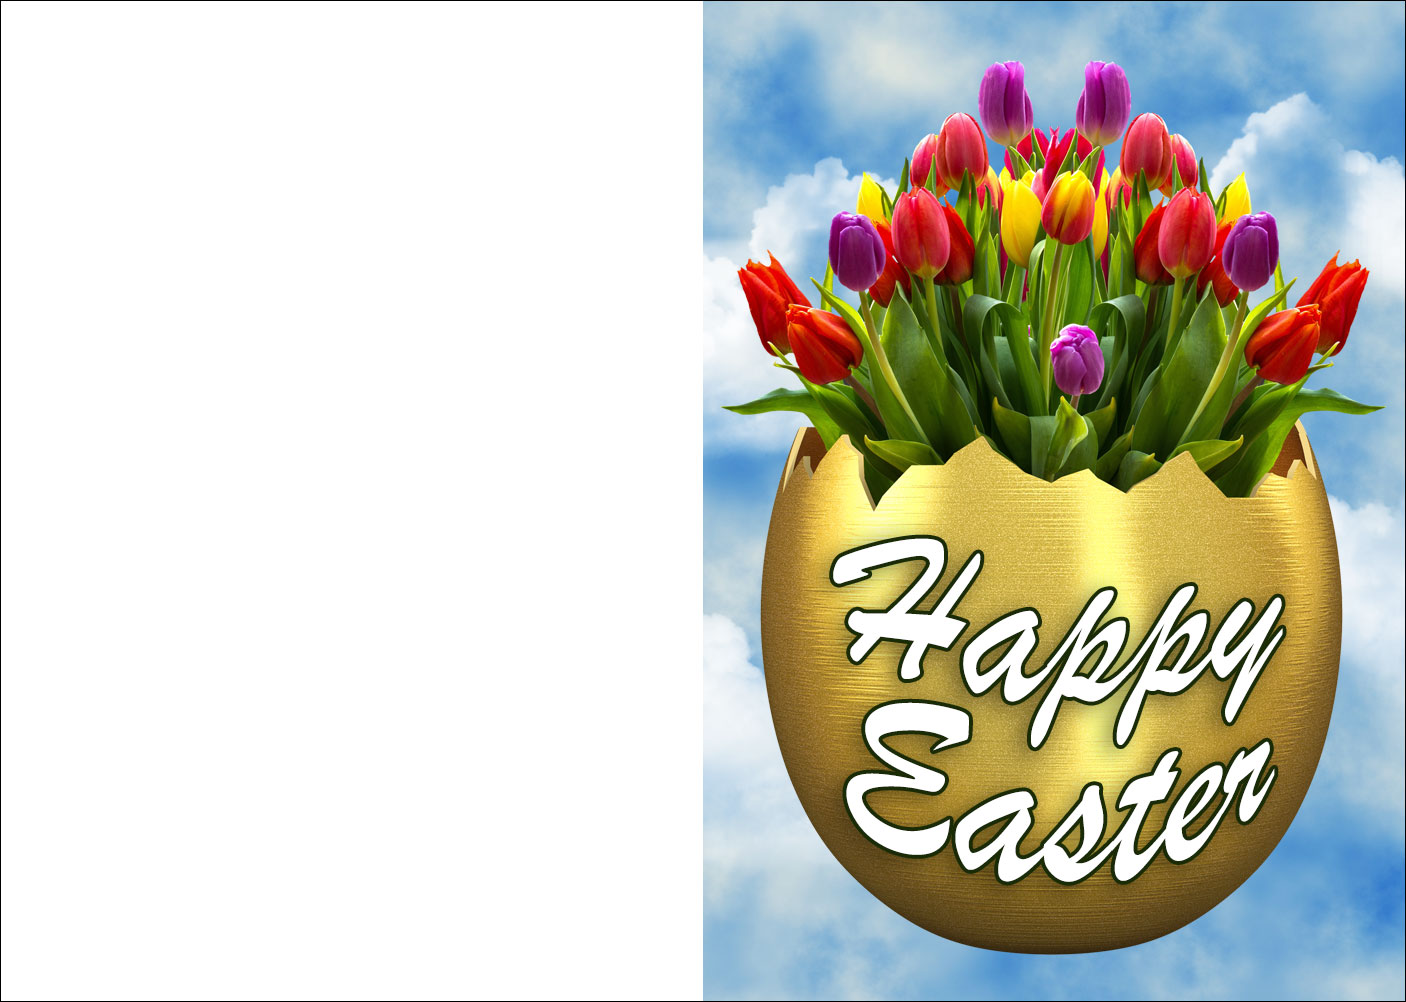 Printable Easter card of a golden egg containing tulips.